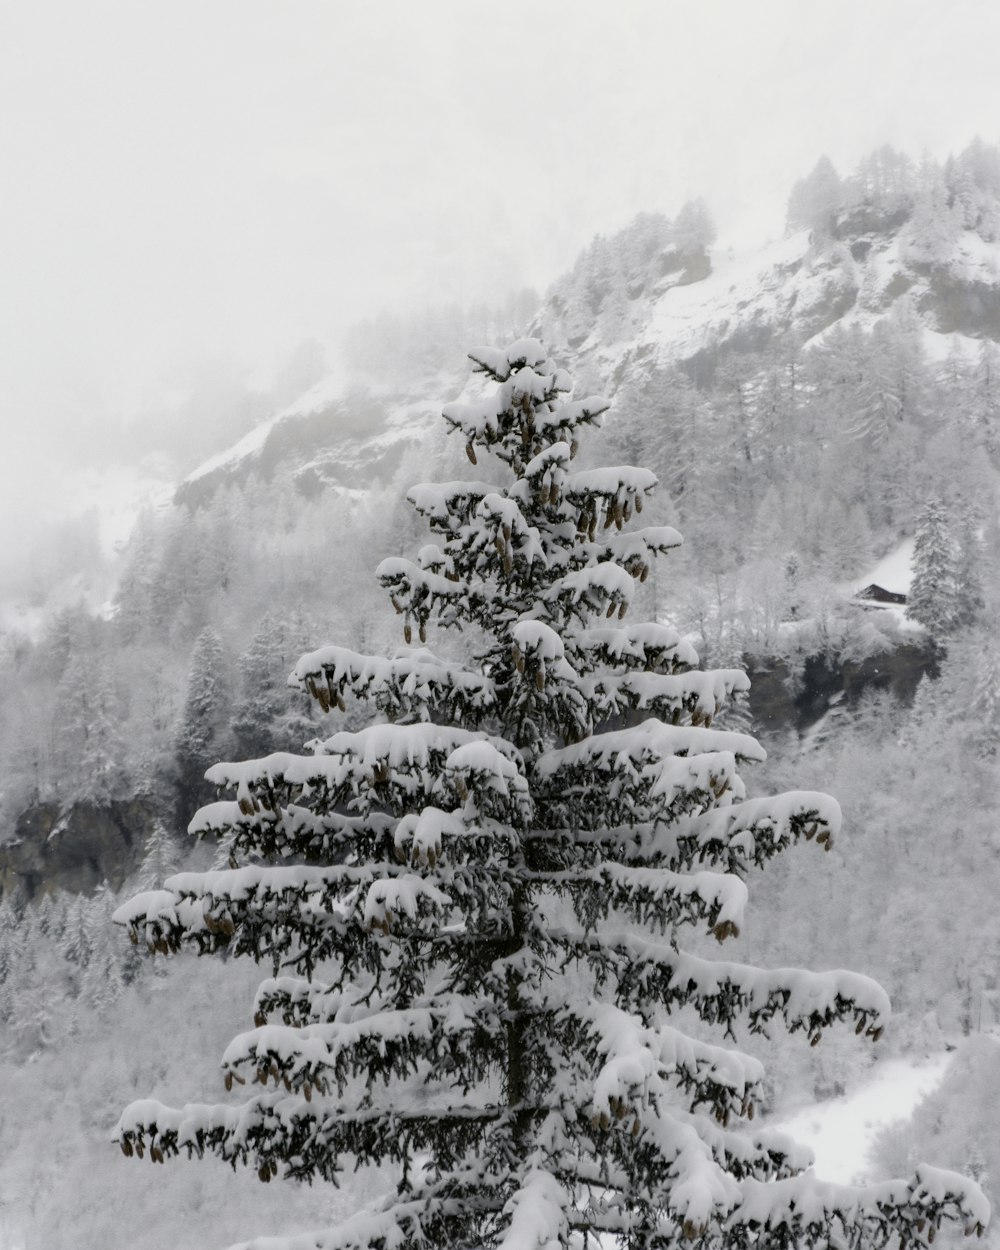 snow covered pine trees during daytime